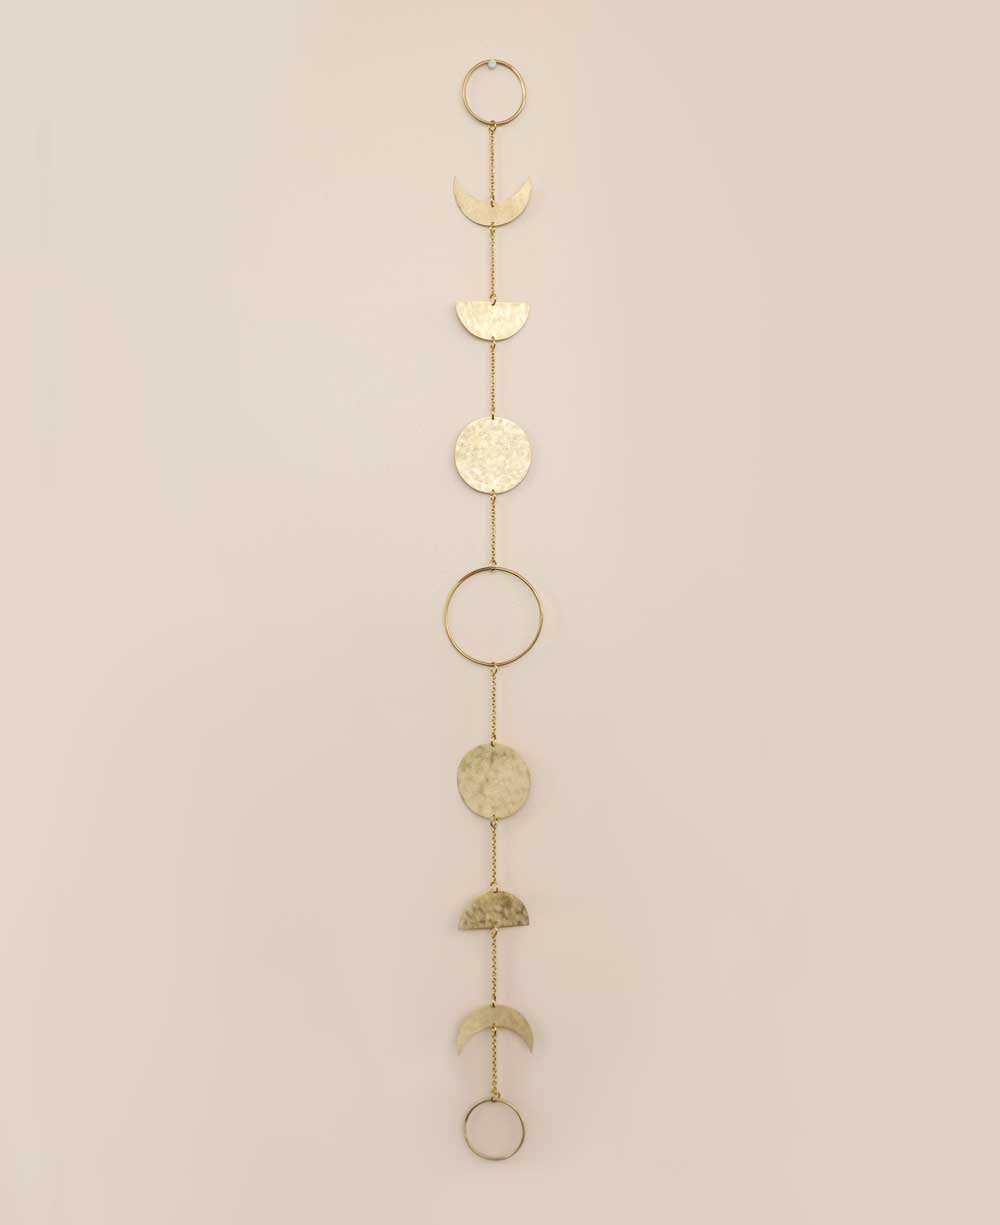 Artistic Moon Phase Brass Wall Hanging - Posters, Prints, & Visual Artwork